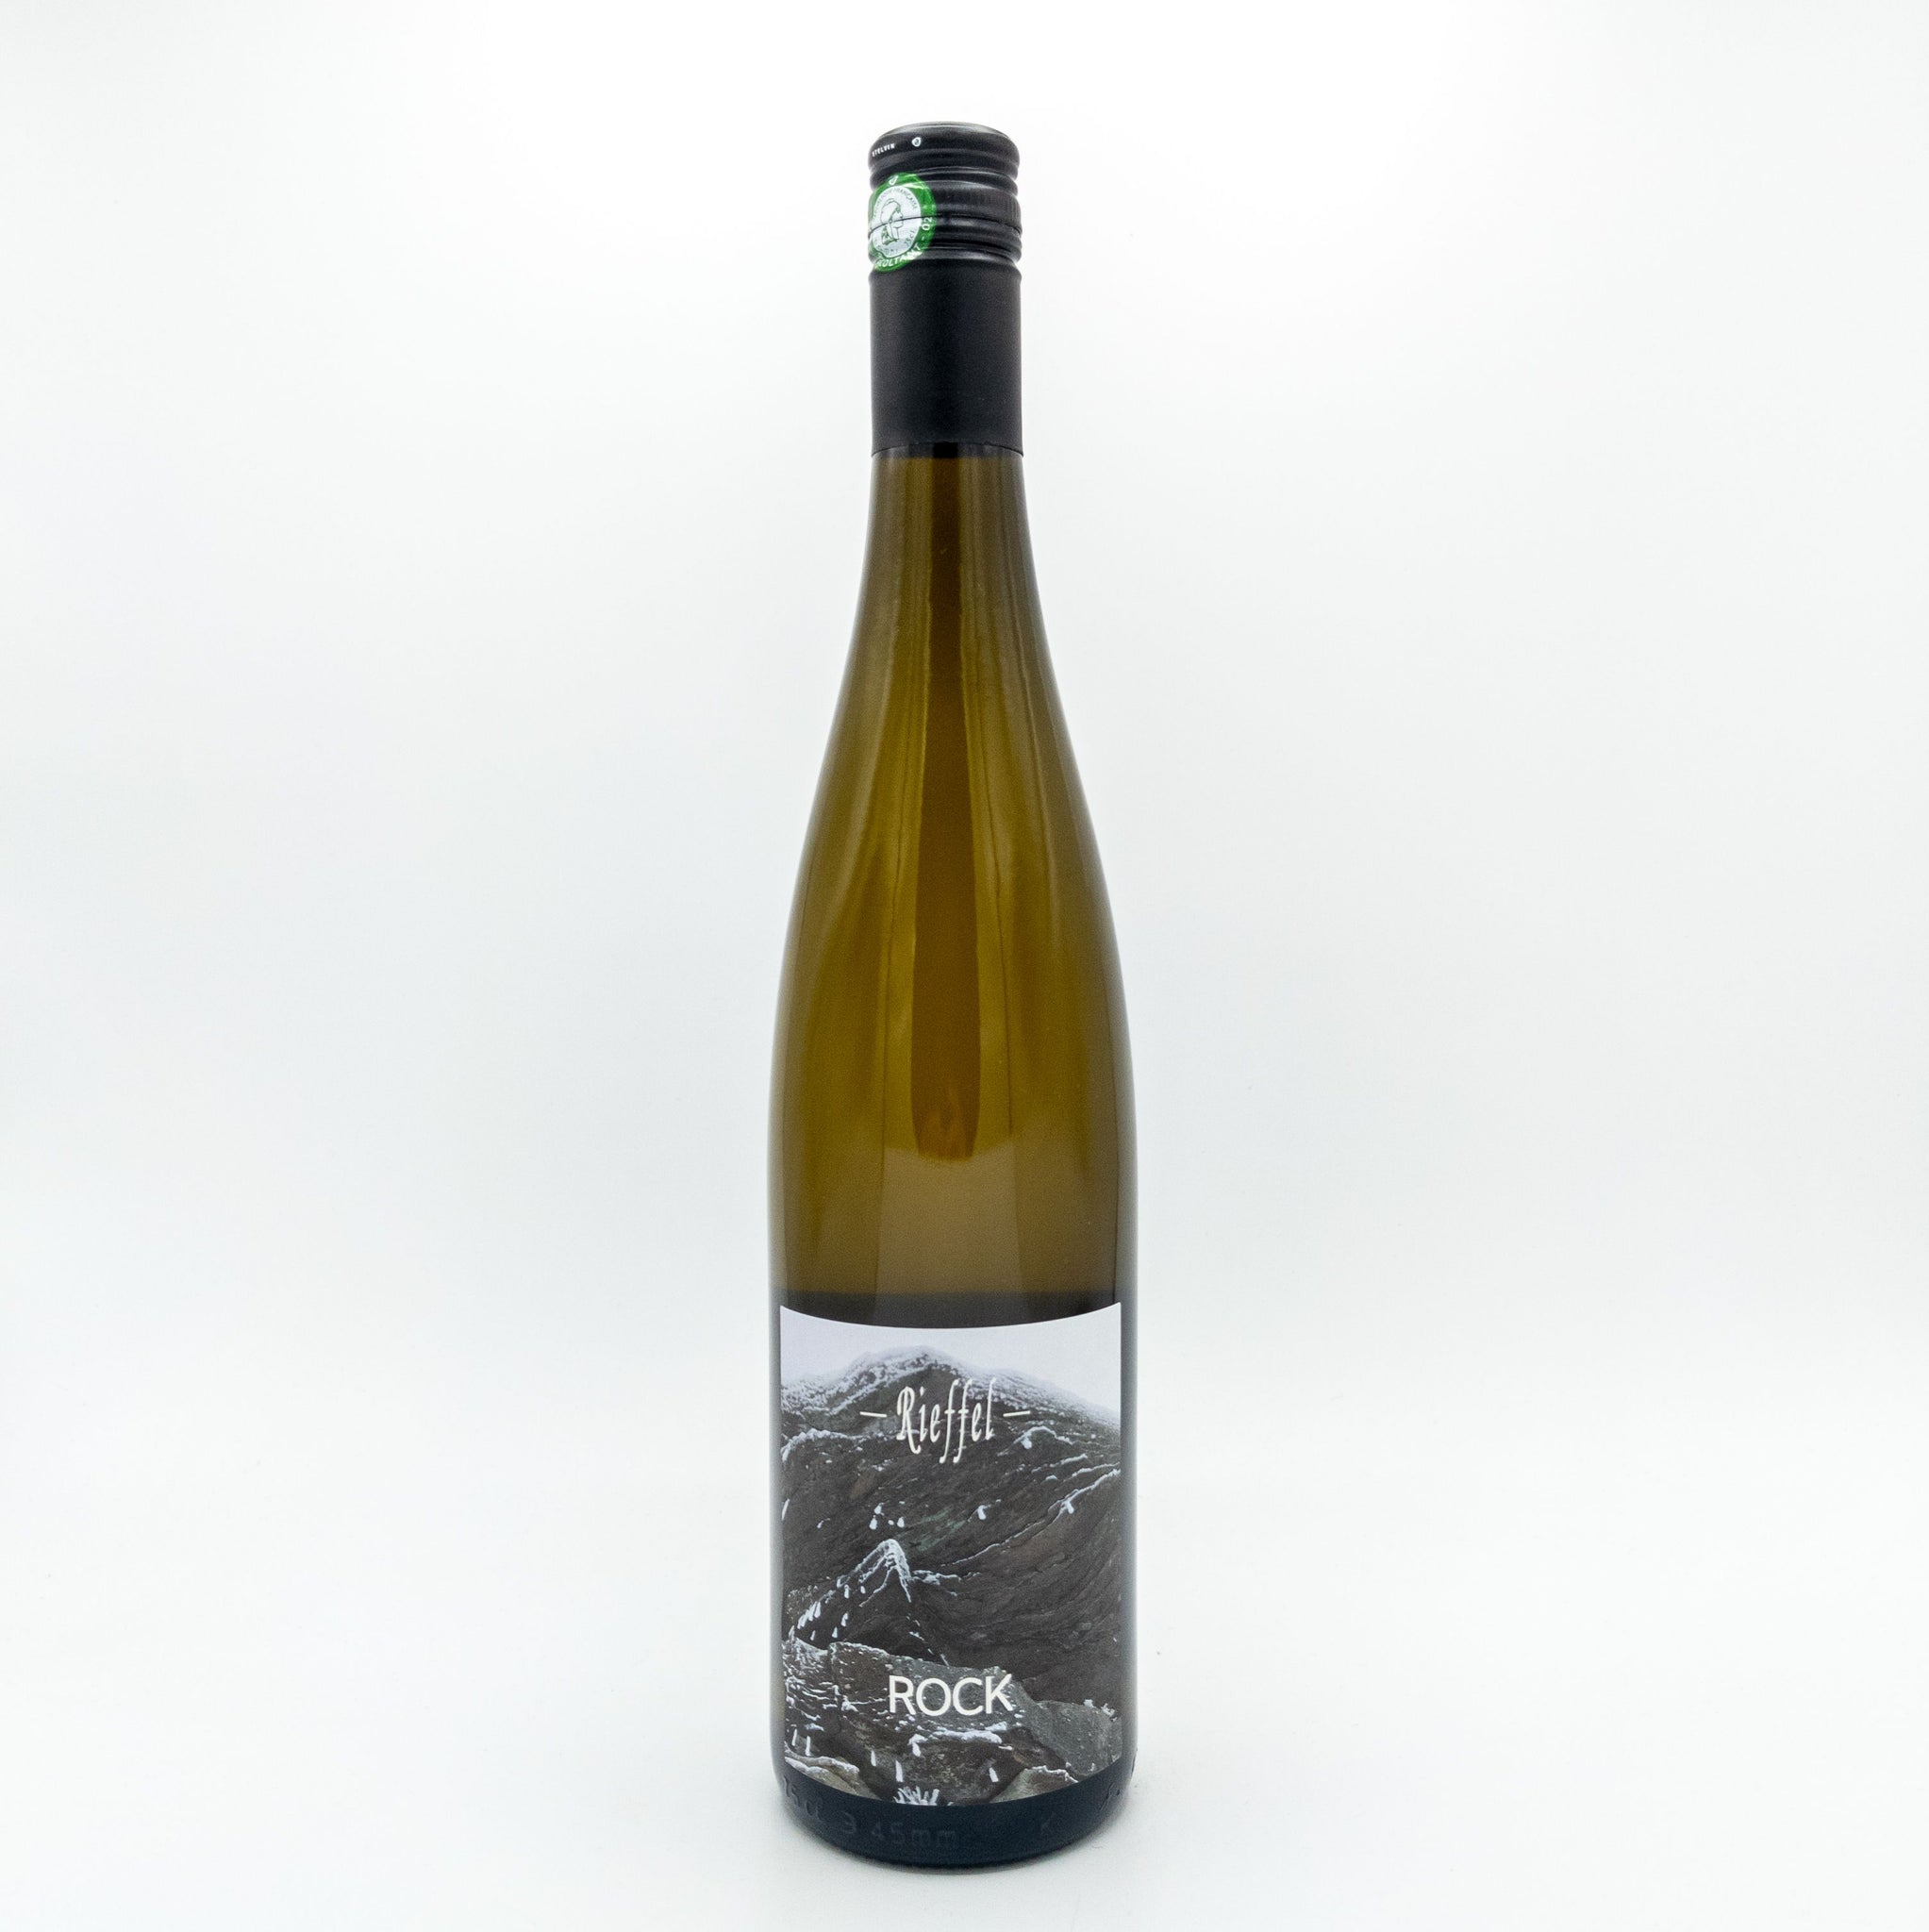 Rieffel 'Riesling Rock Nature' 2019